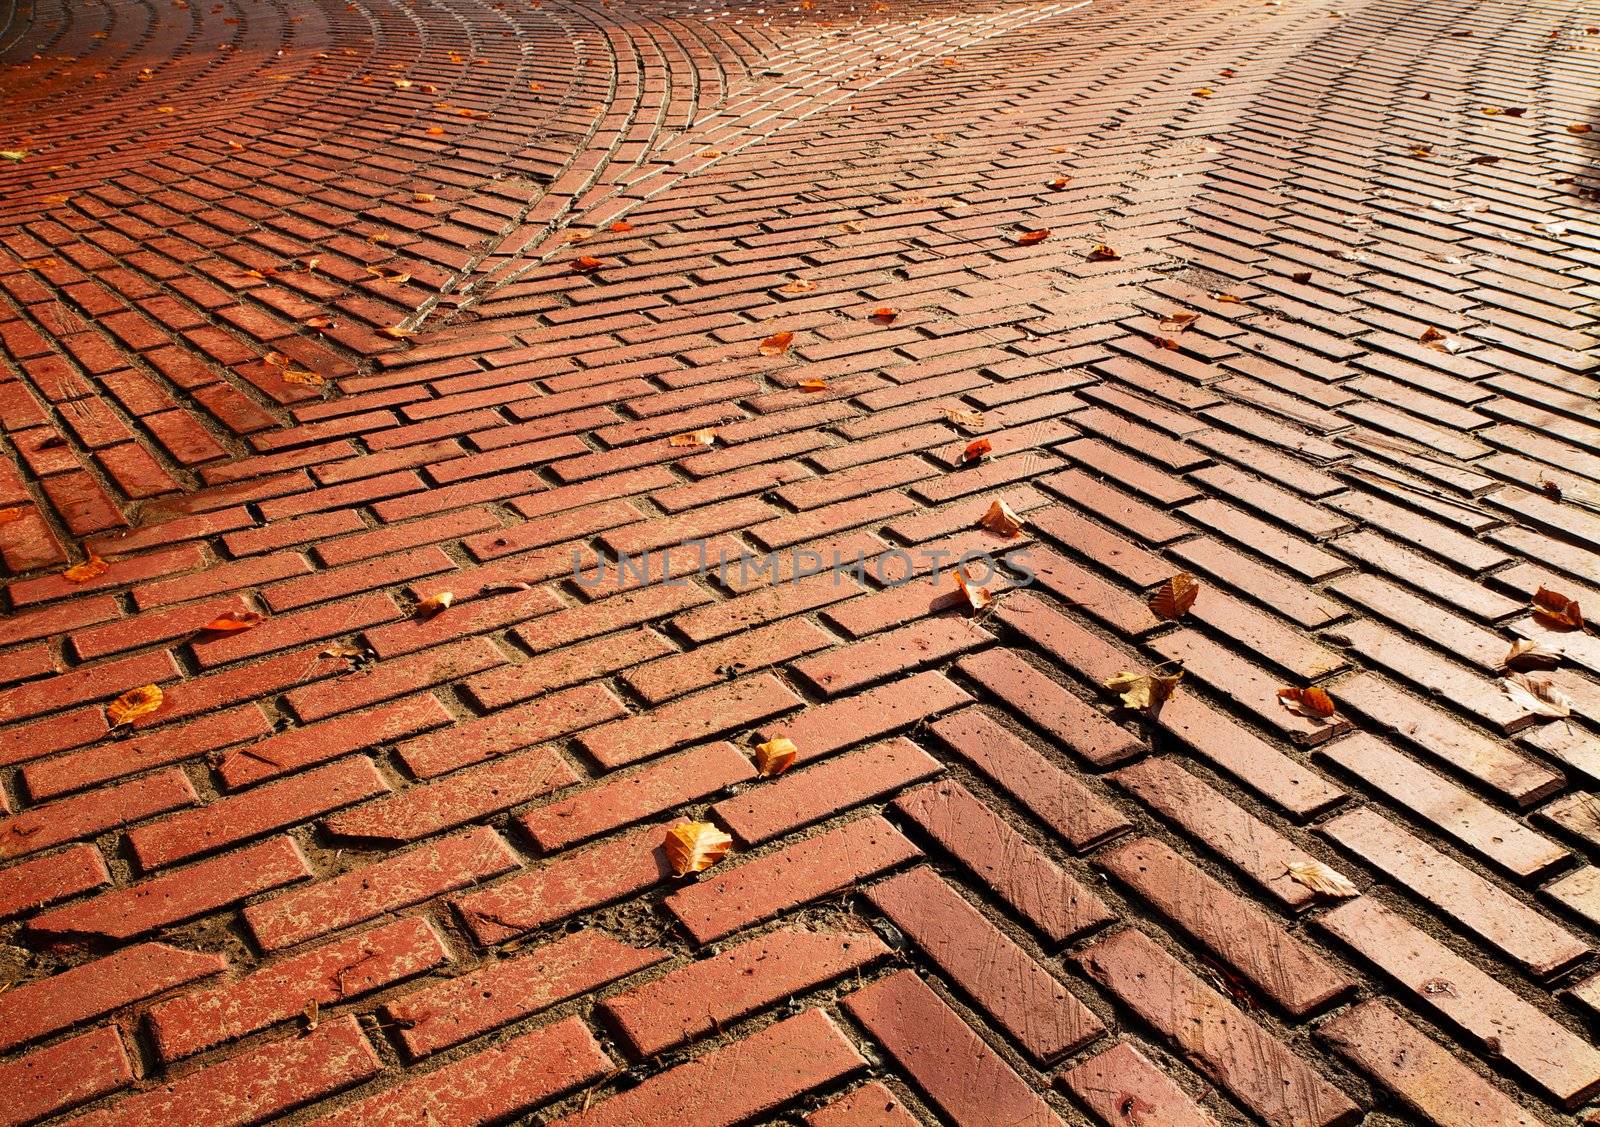 Red brick road split into two directions with herringbone pattern requiring a decision